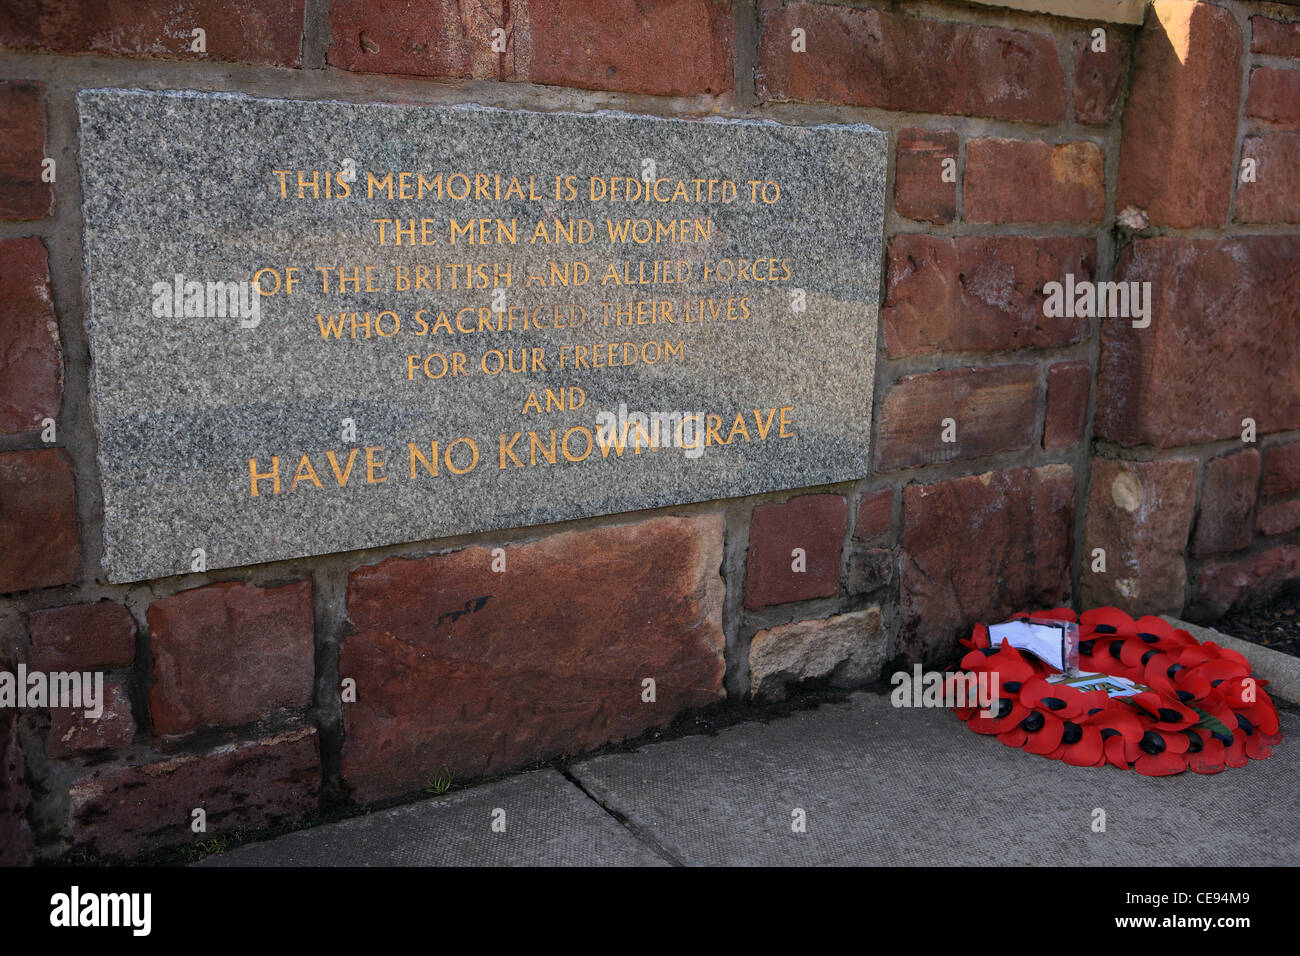 Memorial plaque for British & Allied Forces who lost their lives in the war and have no known grave Stock Photo